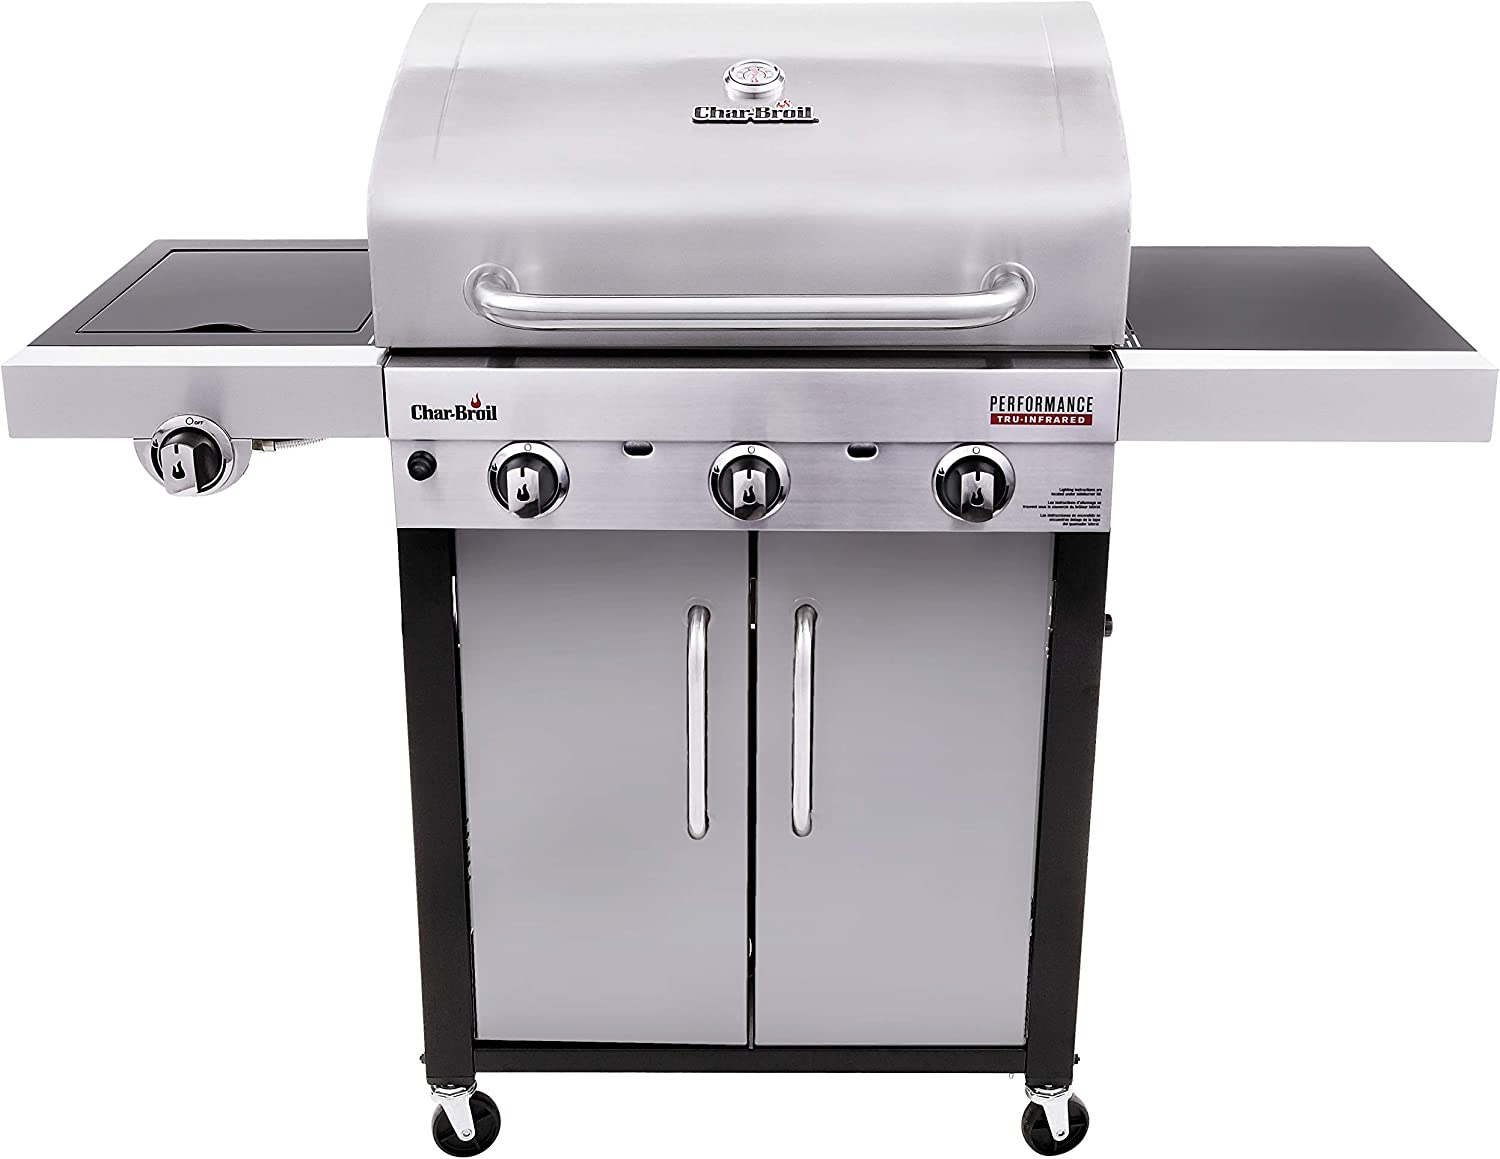 Char-Broil Performance Series™ TRU-Infrared™ 3-Burner Gas Grill - image 1 of 6